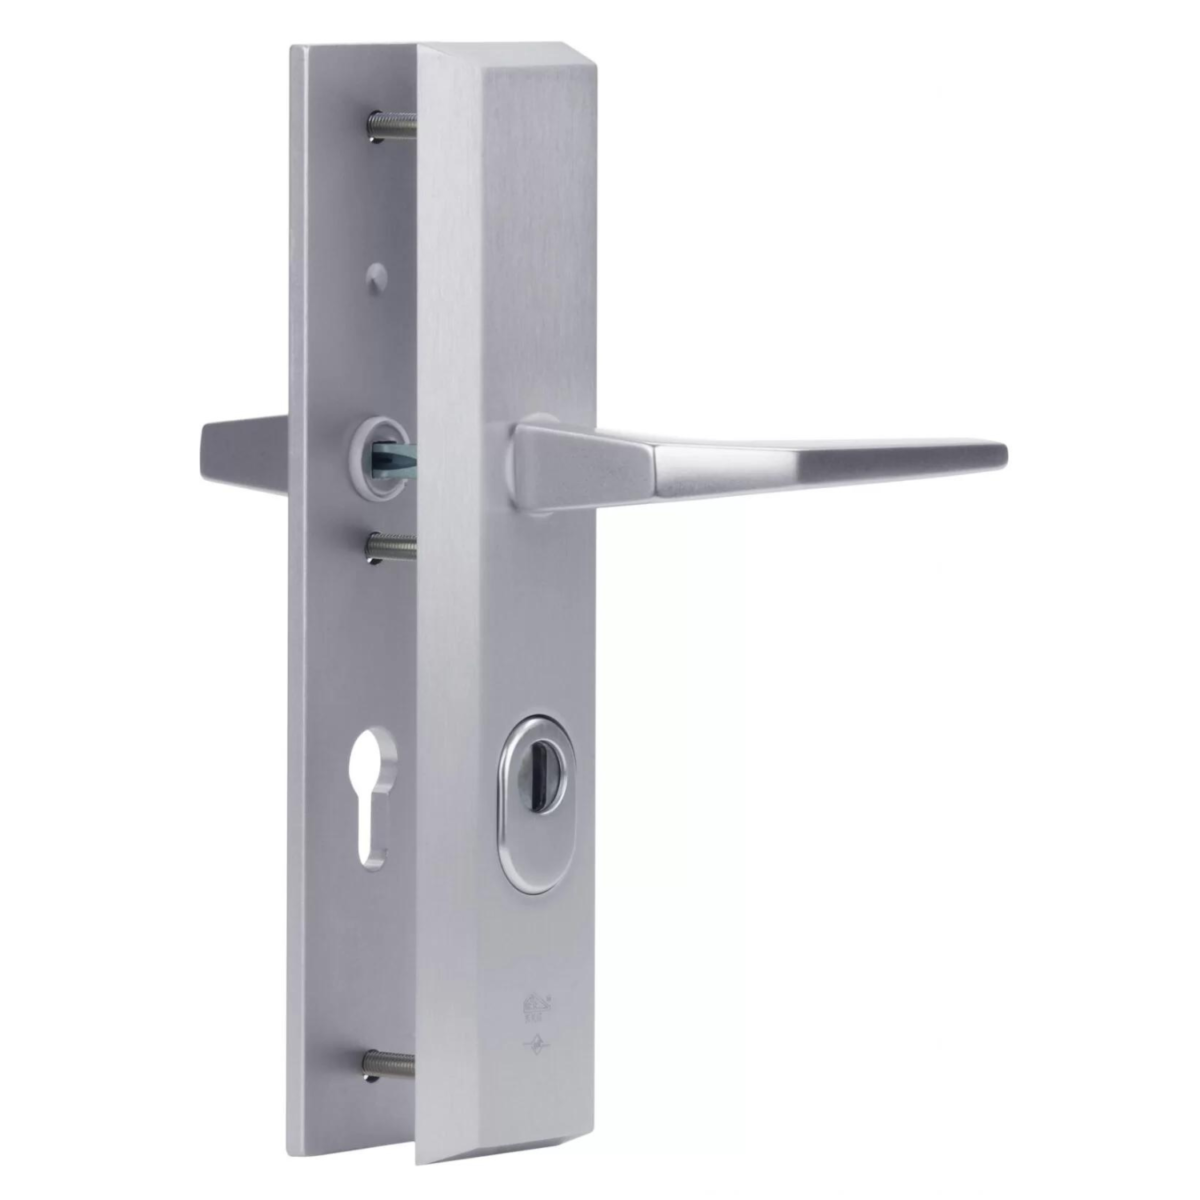 Dieckmann Alpha renovation back door fitting with inside and outside handle D7013 XXL version